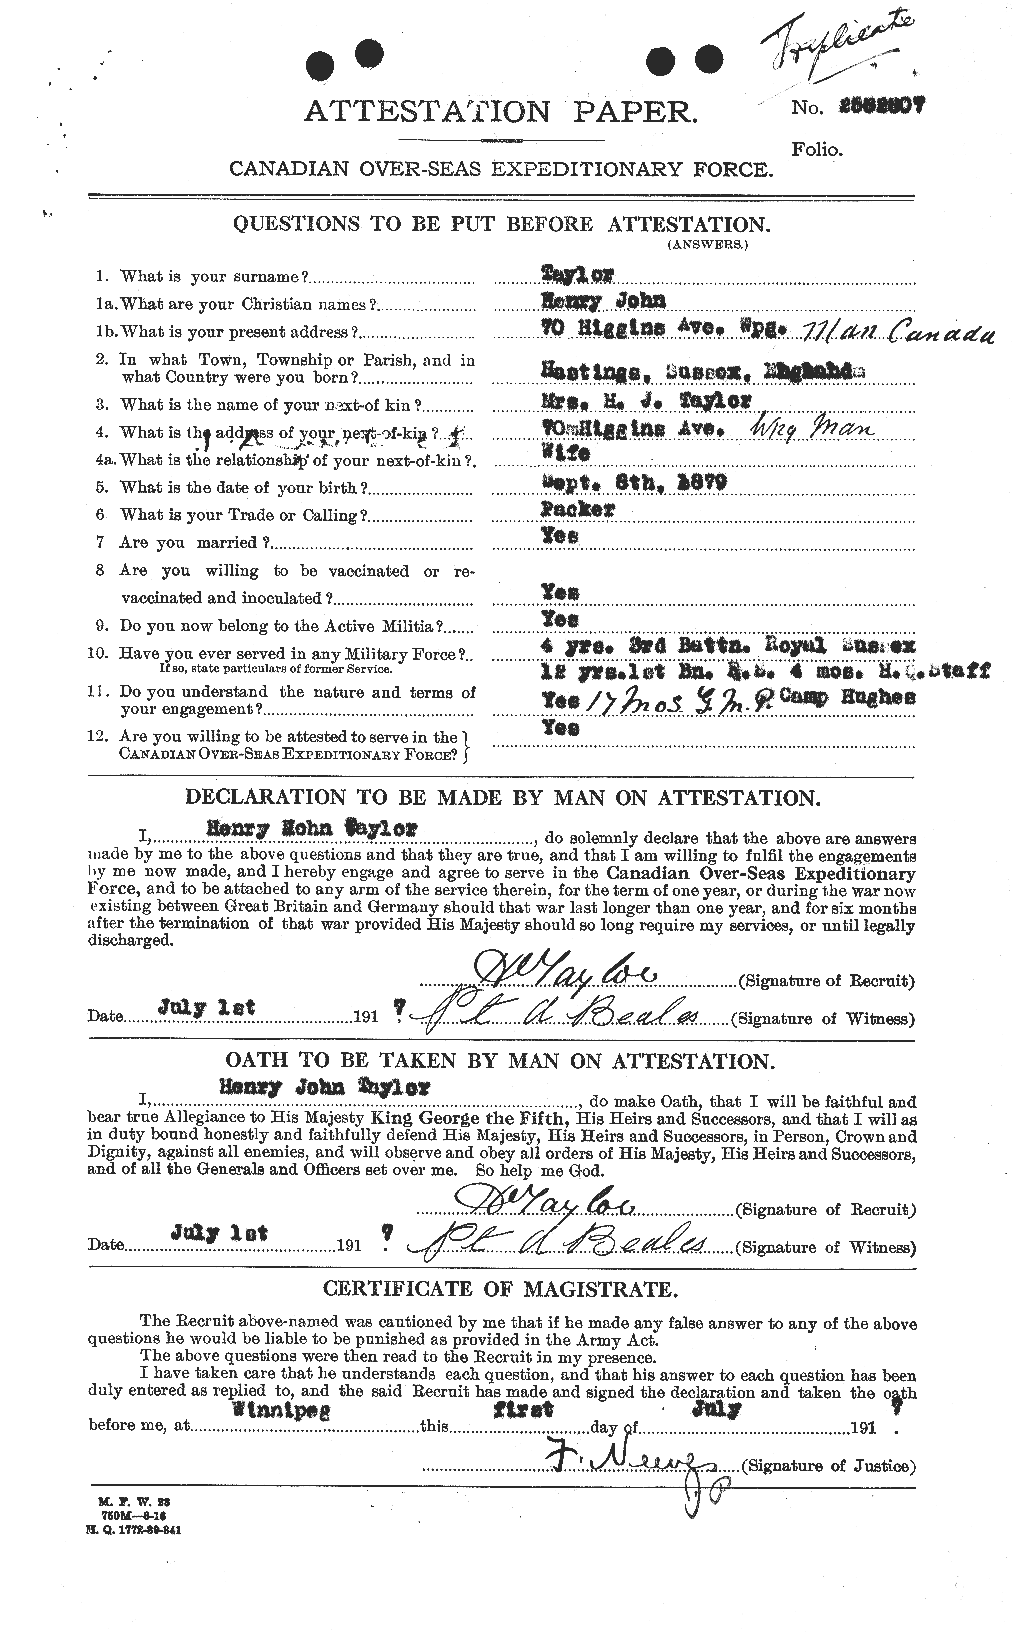 Personnel Records of the First World War - CEF 626547a